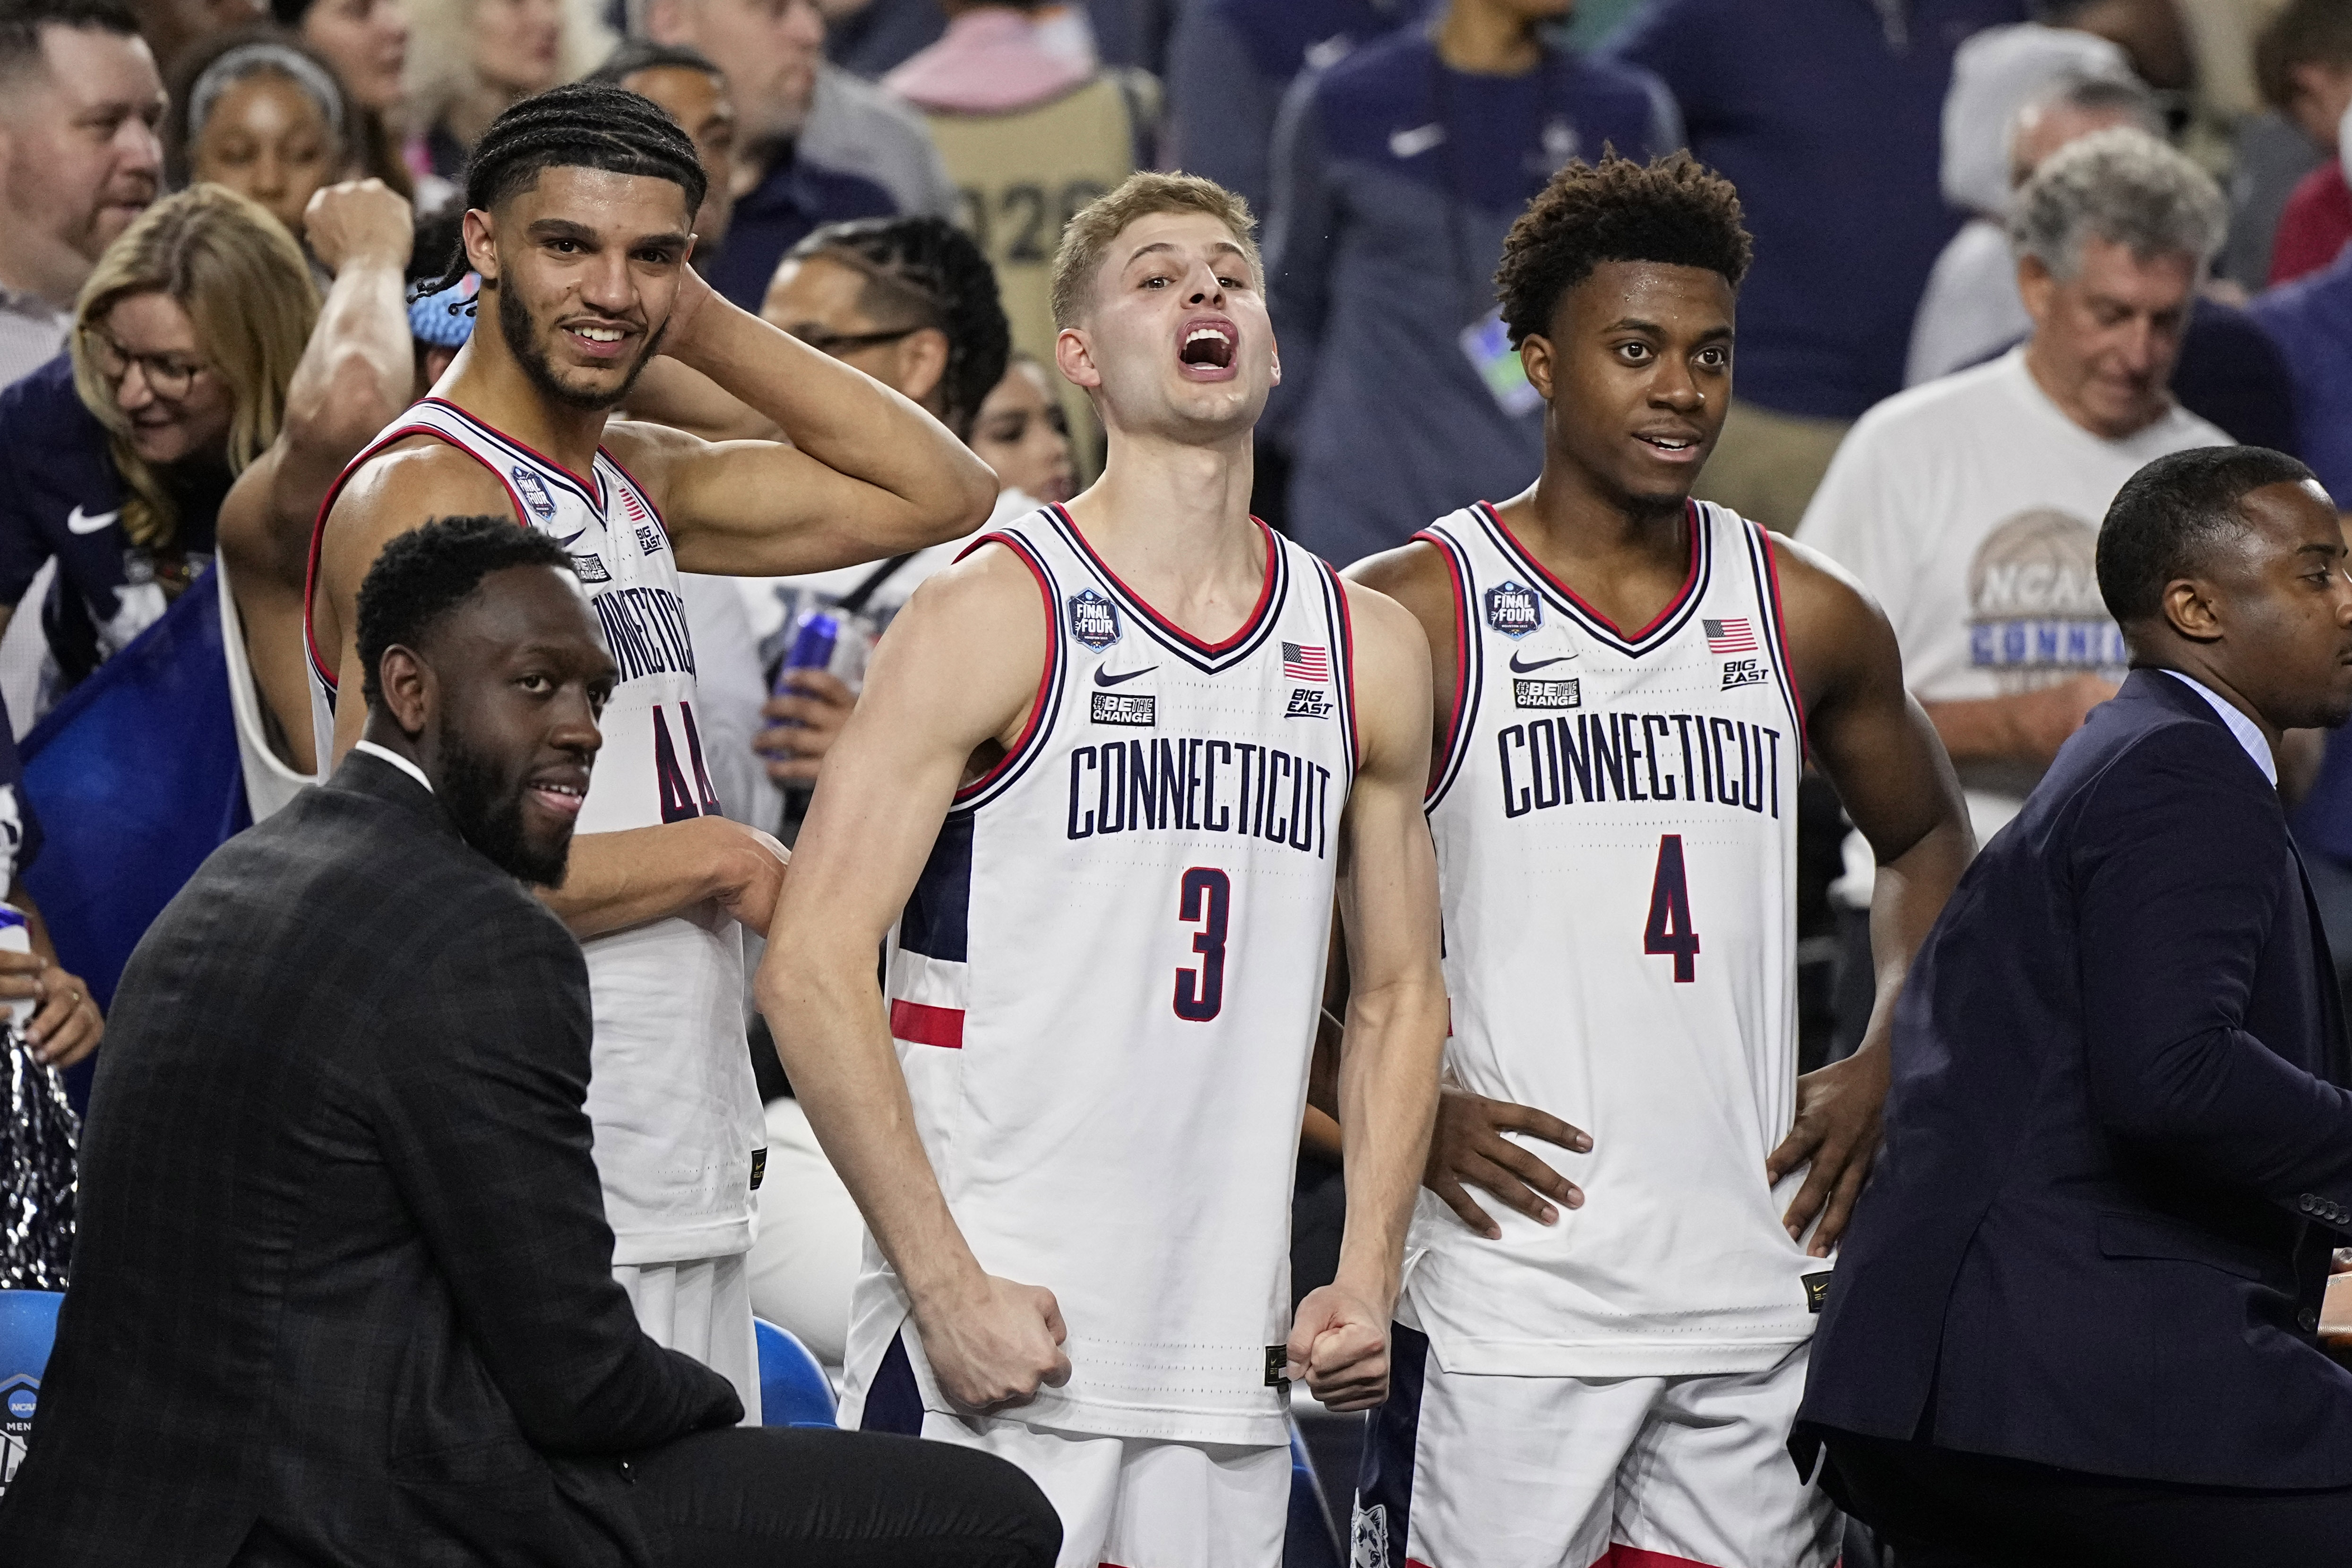 UConn-San Diego State live stream (4/3) How to watch NCAA national championship online, TV, time